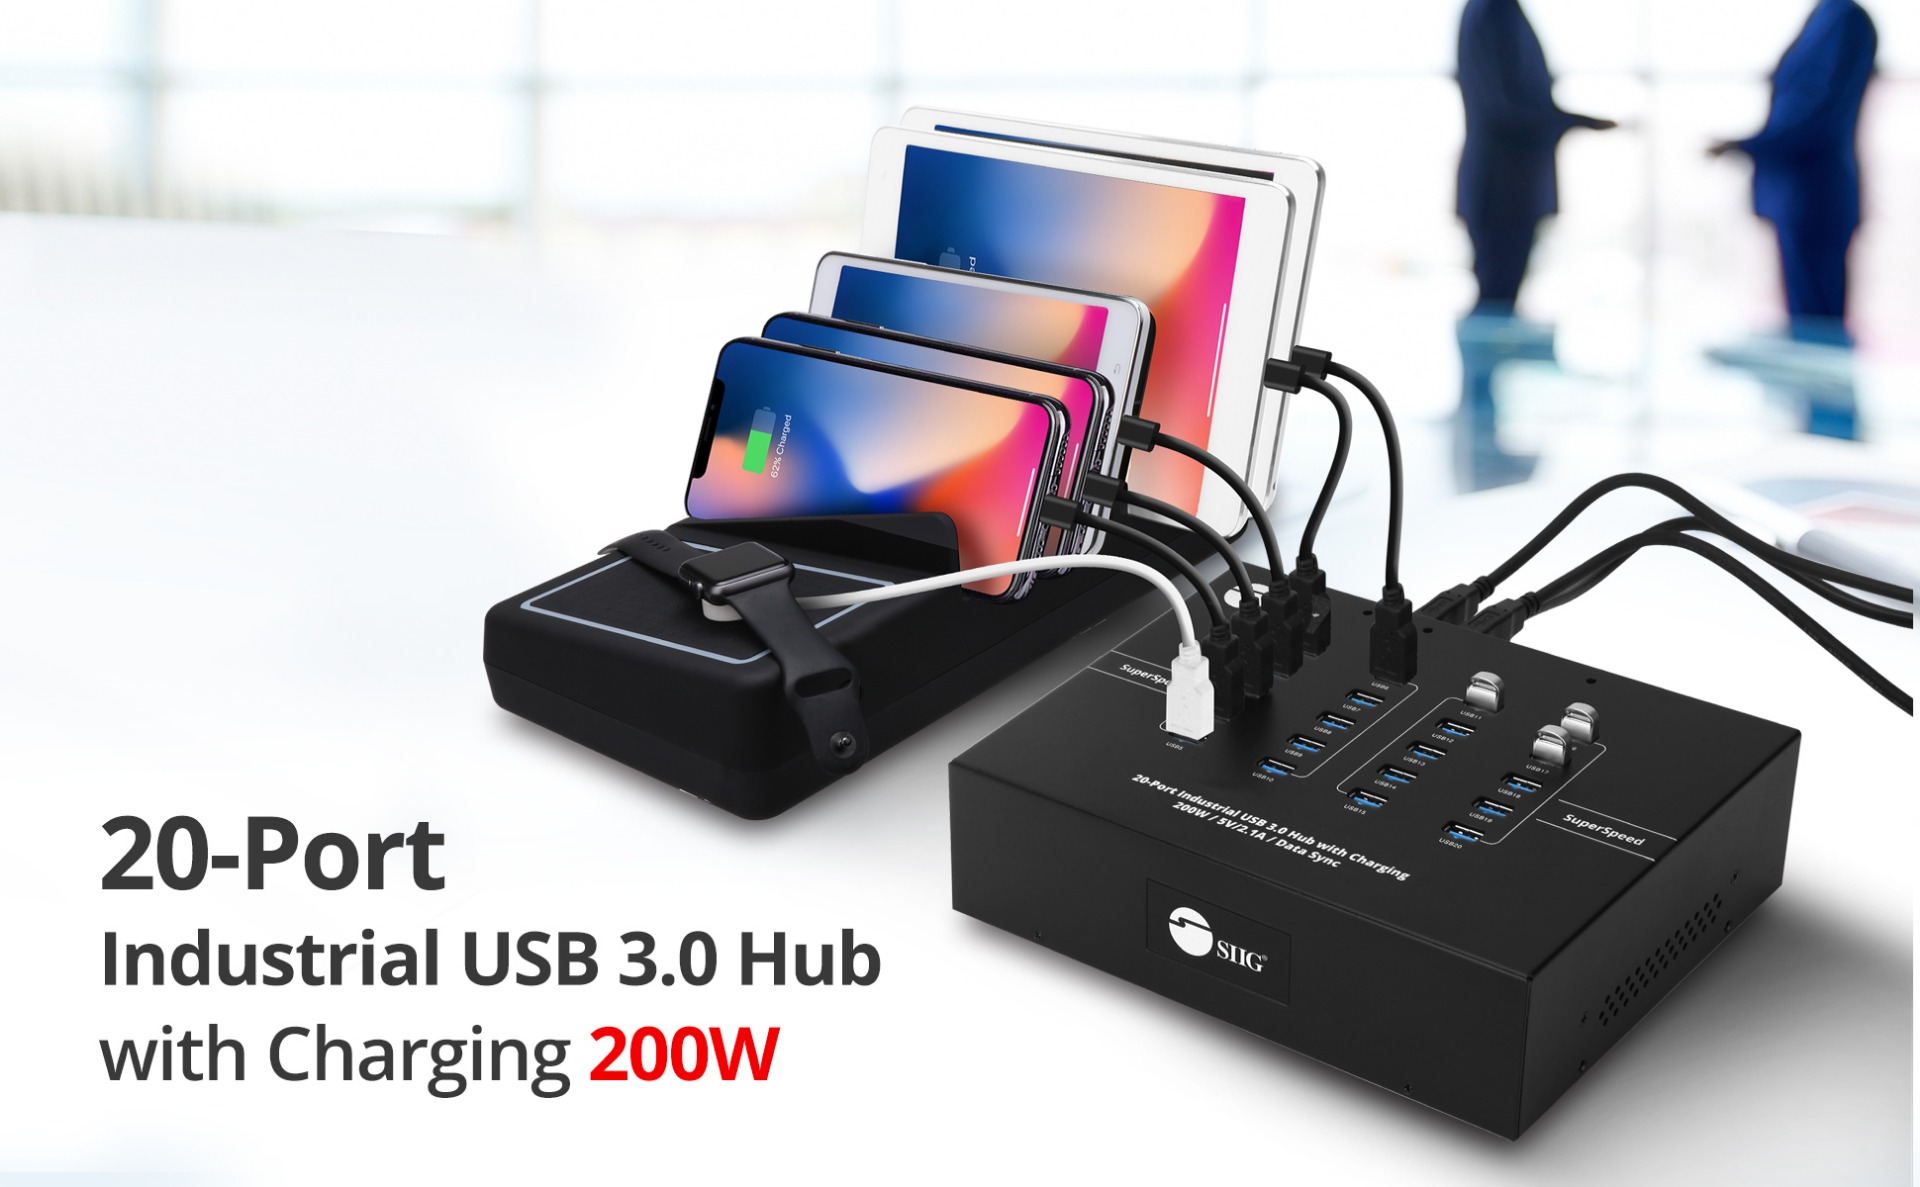 20-Port Industrial USB 3.0 Hub with Charging